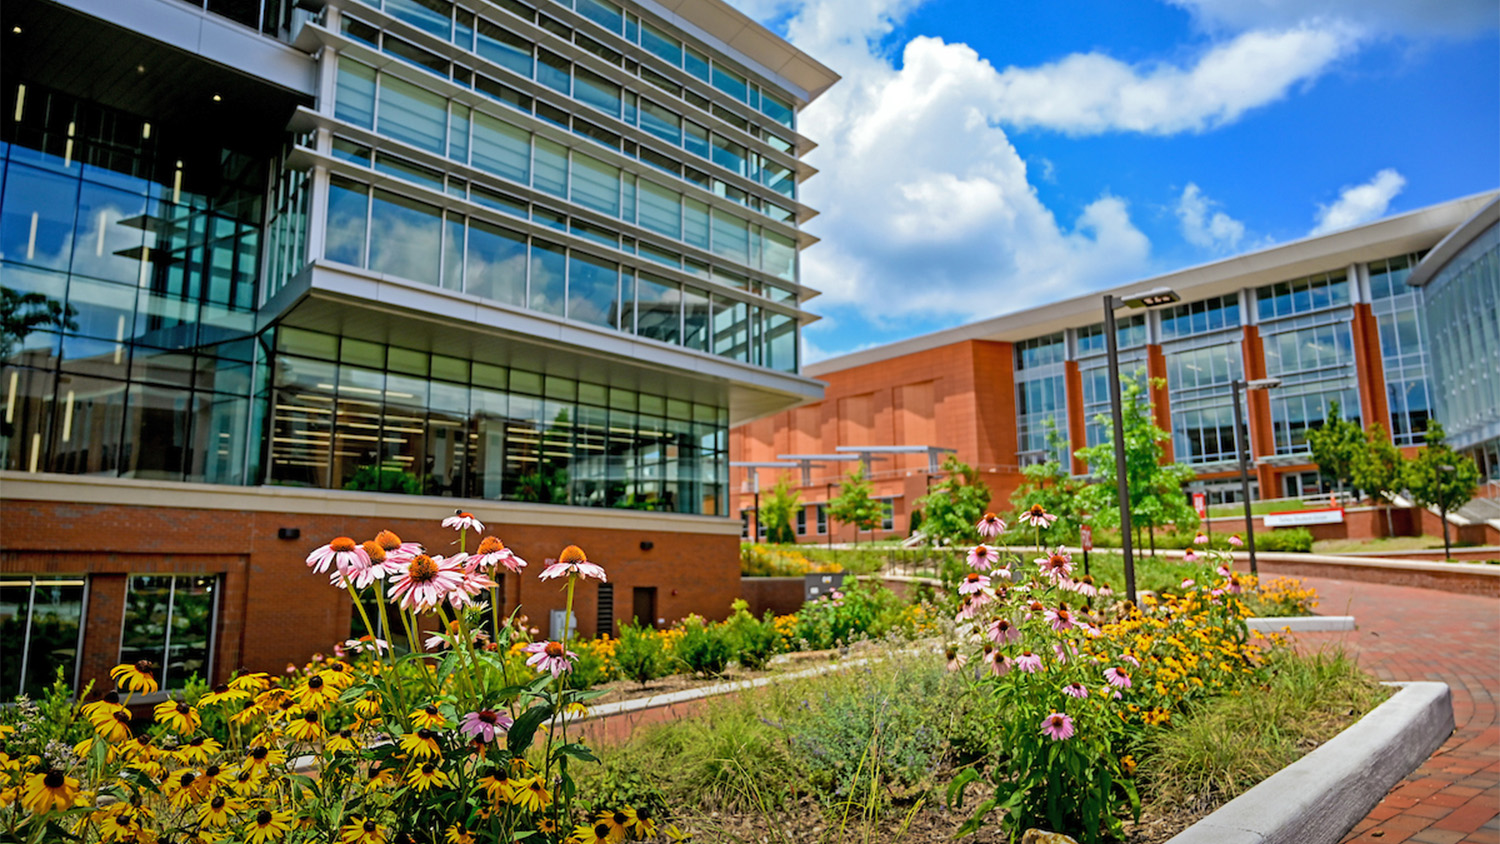 Exterior of the Wellness and Recreation building and Talley Student Union, with colorful flowers in the foreground